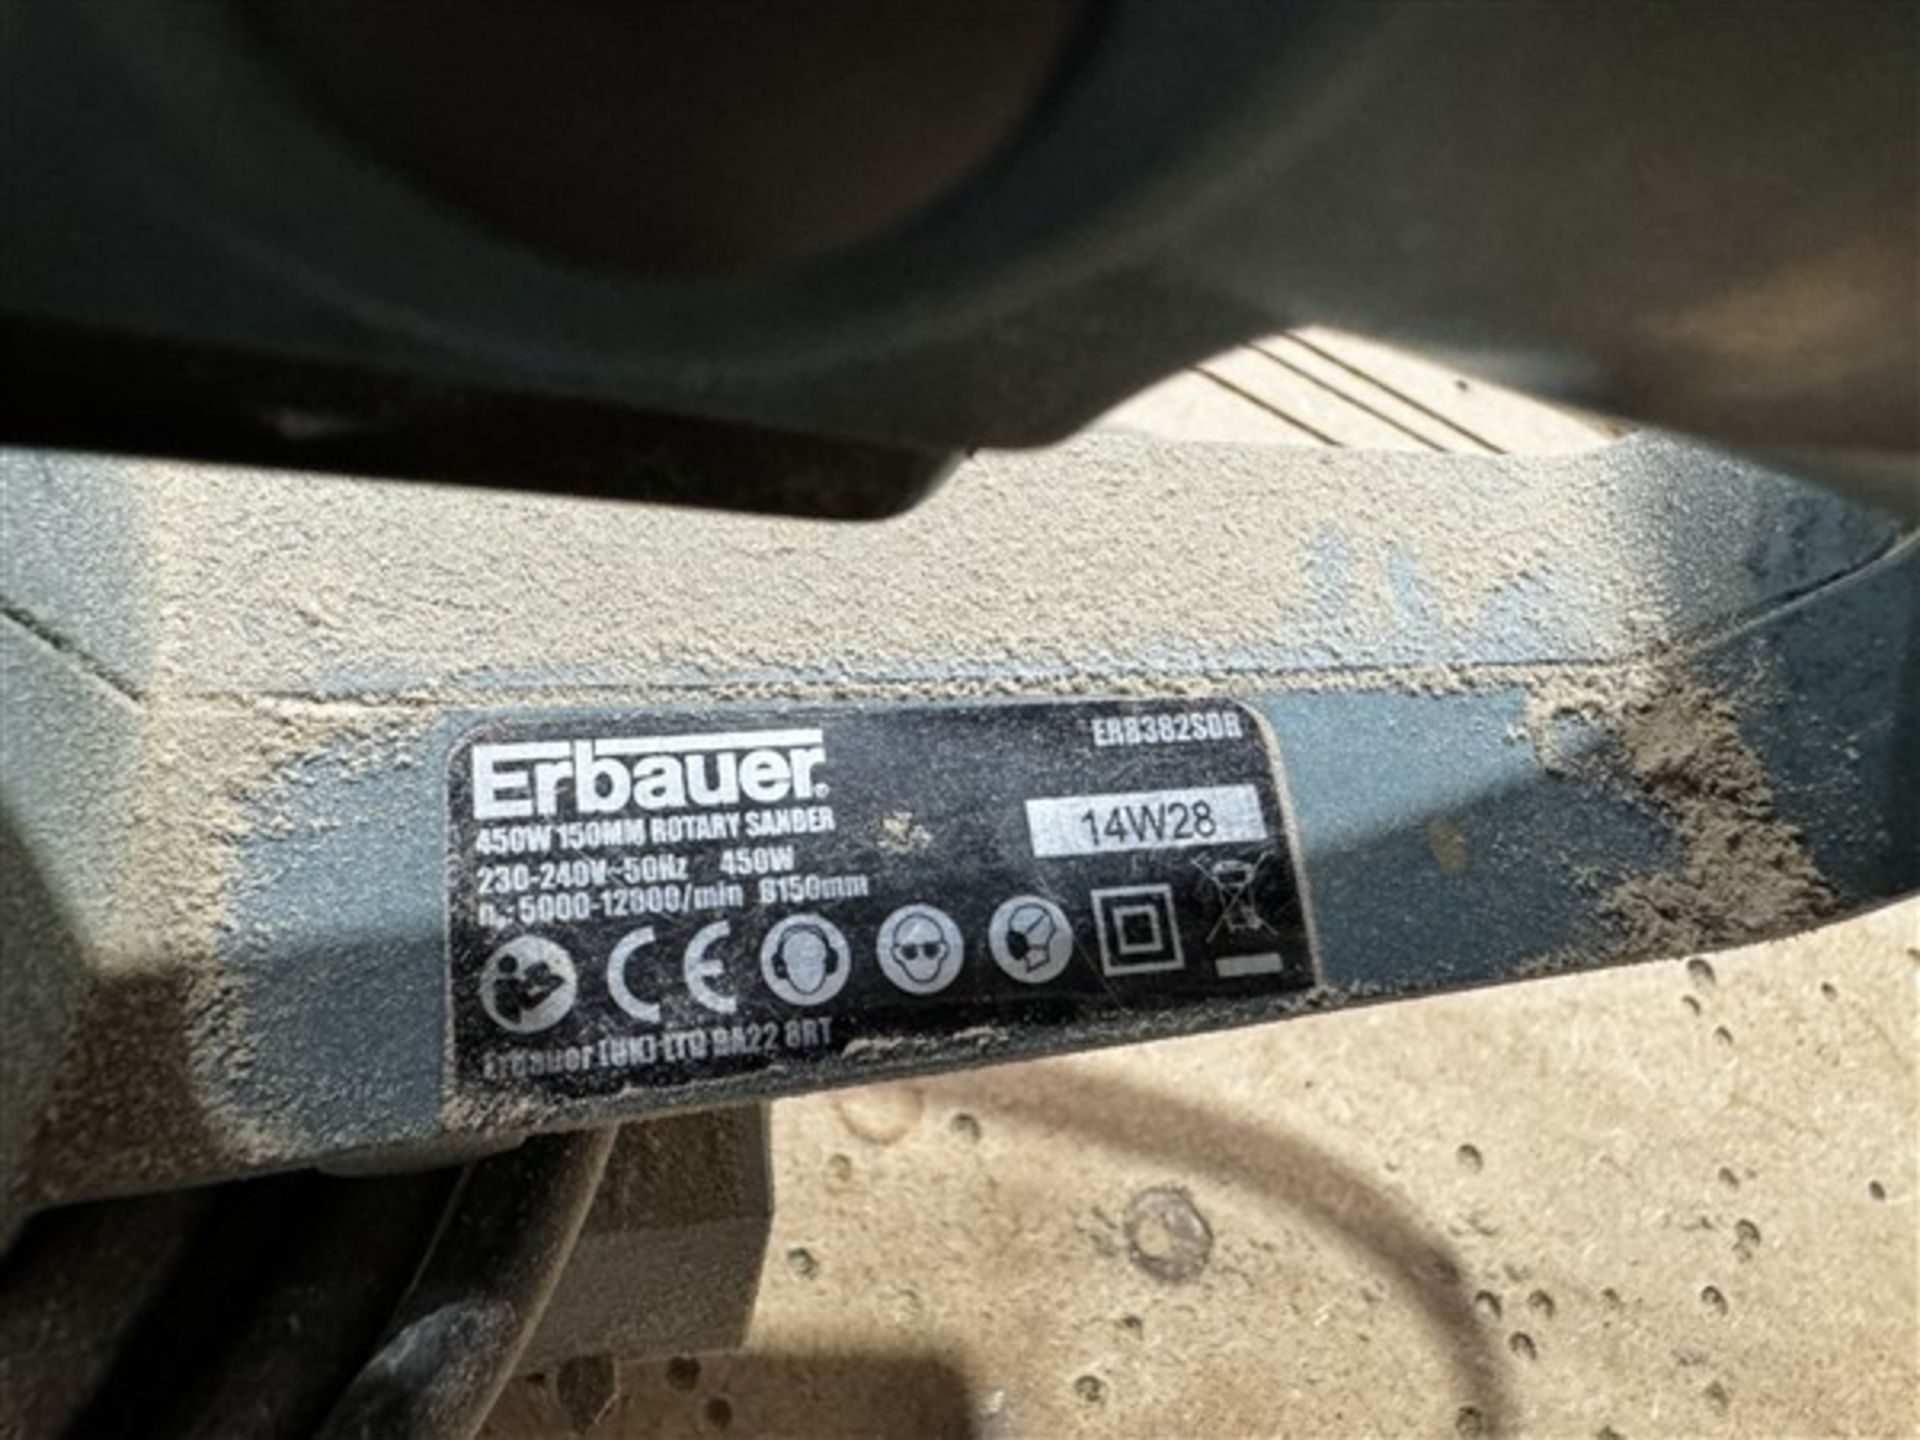 Erbauer H30W 150mm rotary sander, model ERB382SDR - Image 2 of 3